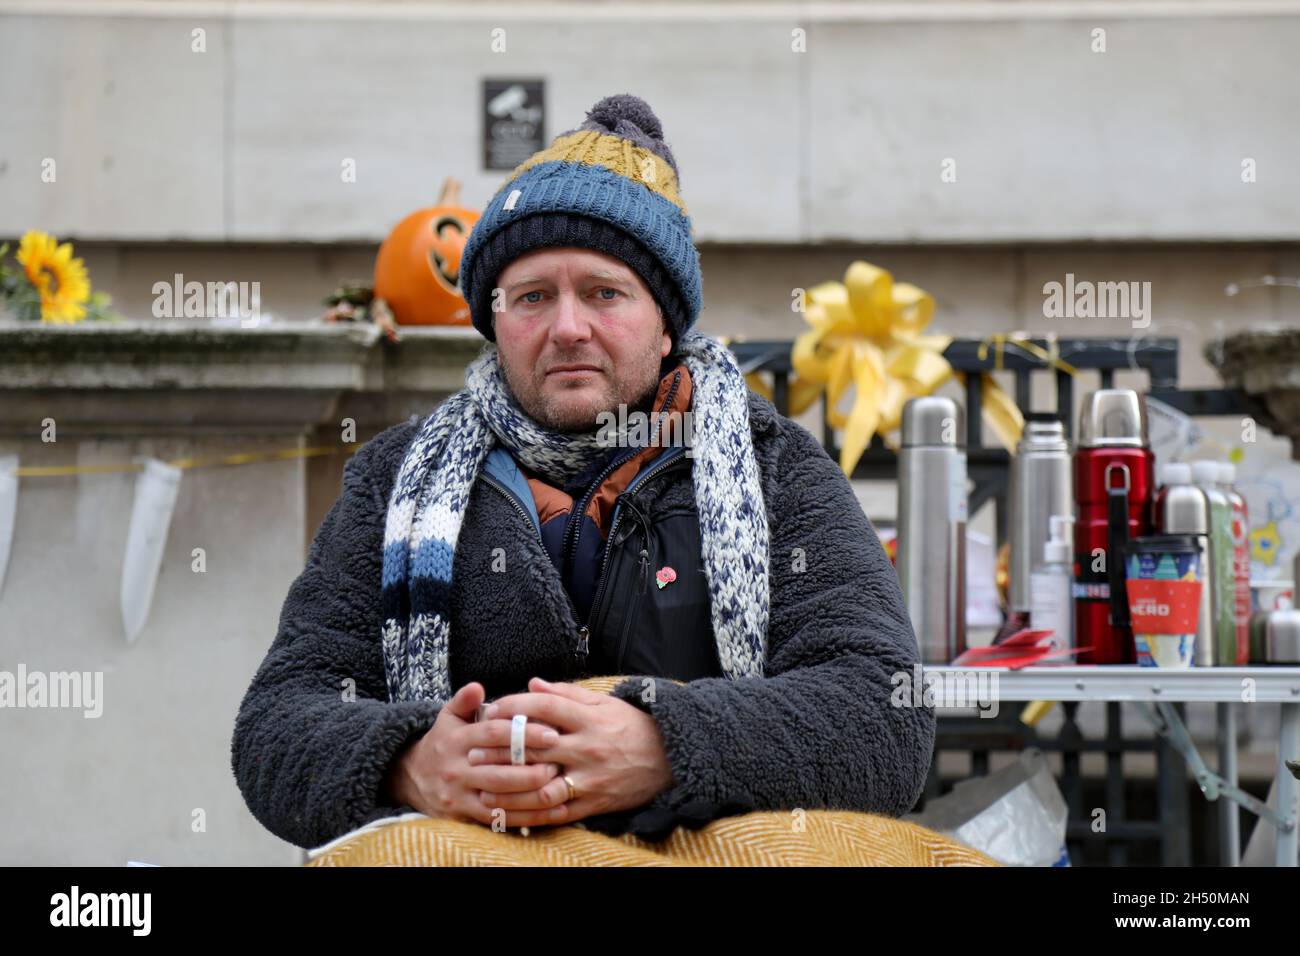 London, UK, 5 November 2021: Richard Ratcliffe on day 13 of his hunger strike outside the UK Foreign Office to demand action from the UK government to Stock Photo